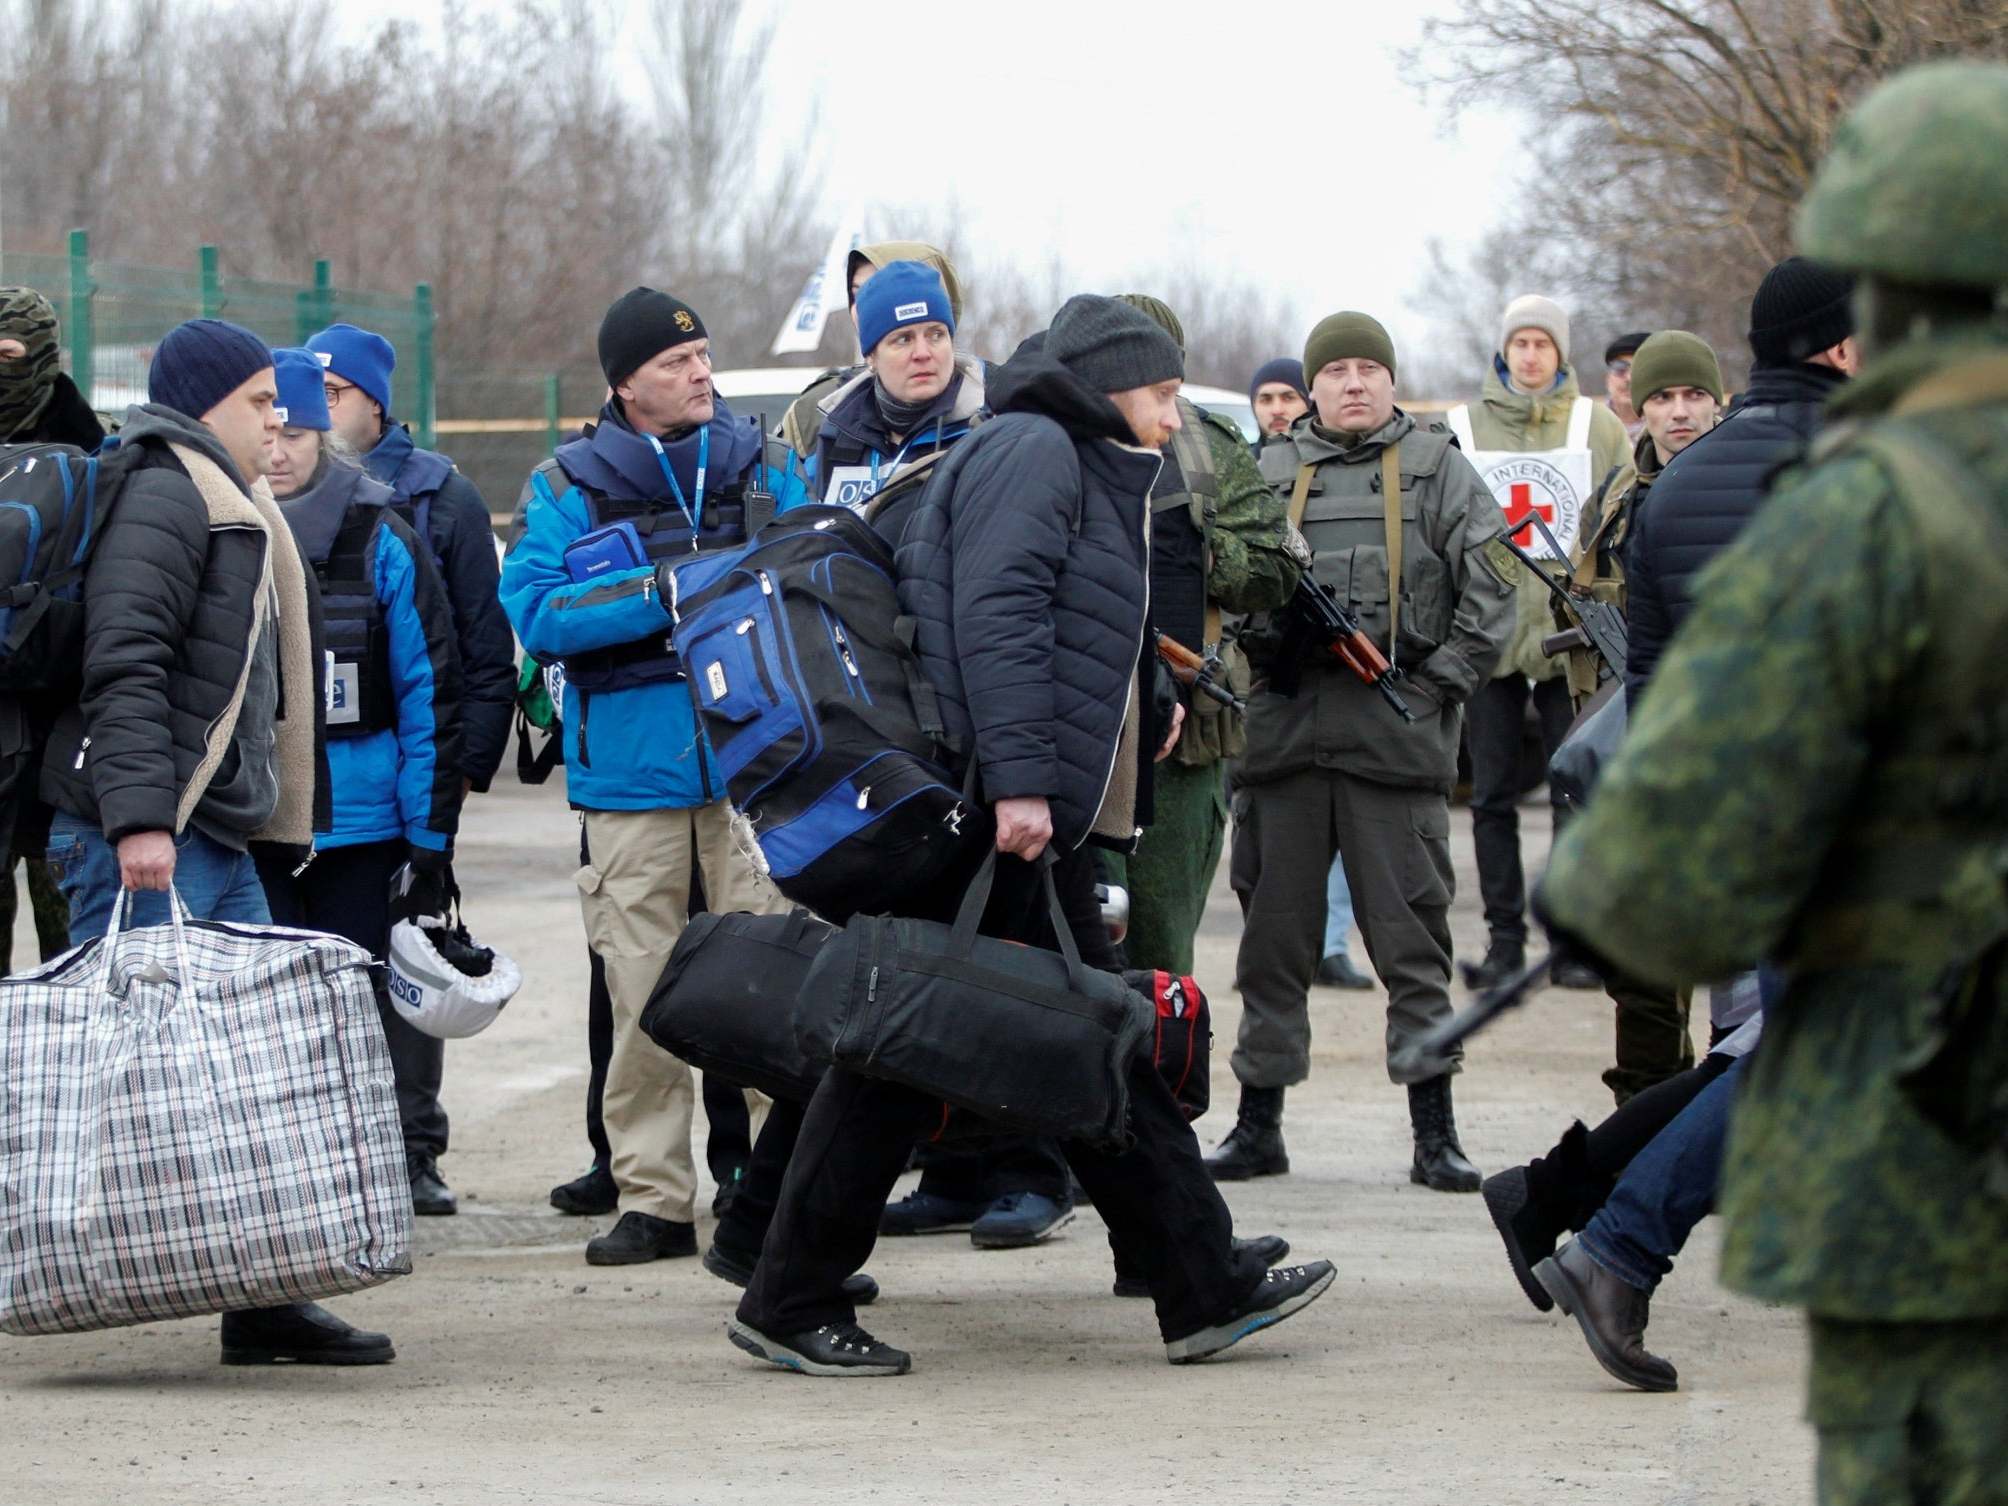 Men are released by Ukrainian authorities during a prisoner of war swap with pro-Russian separatists